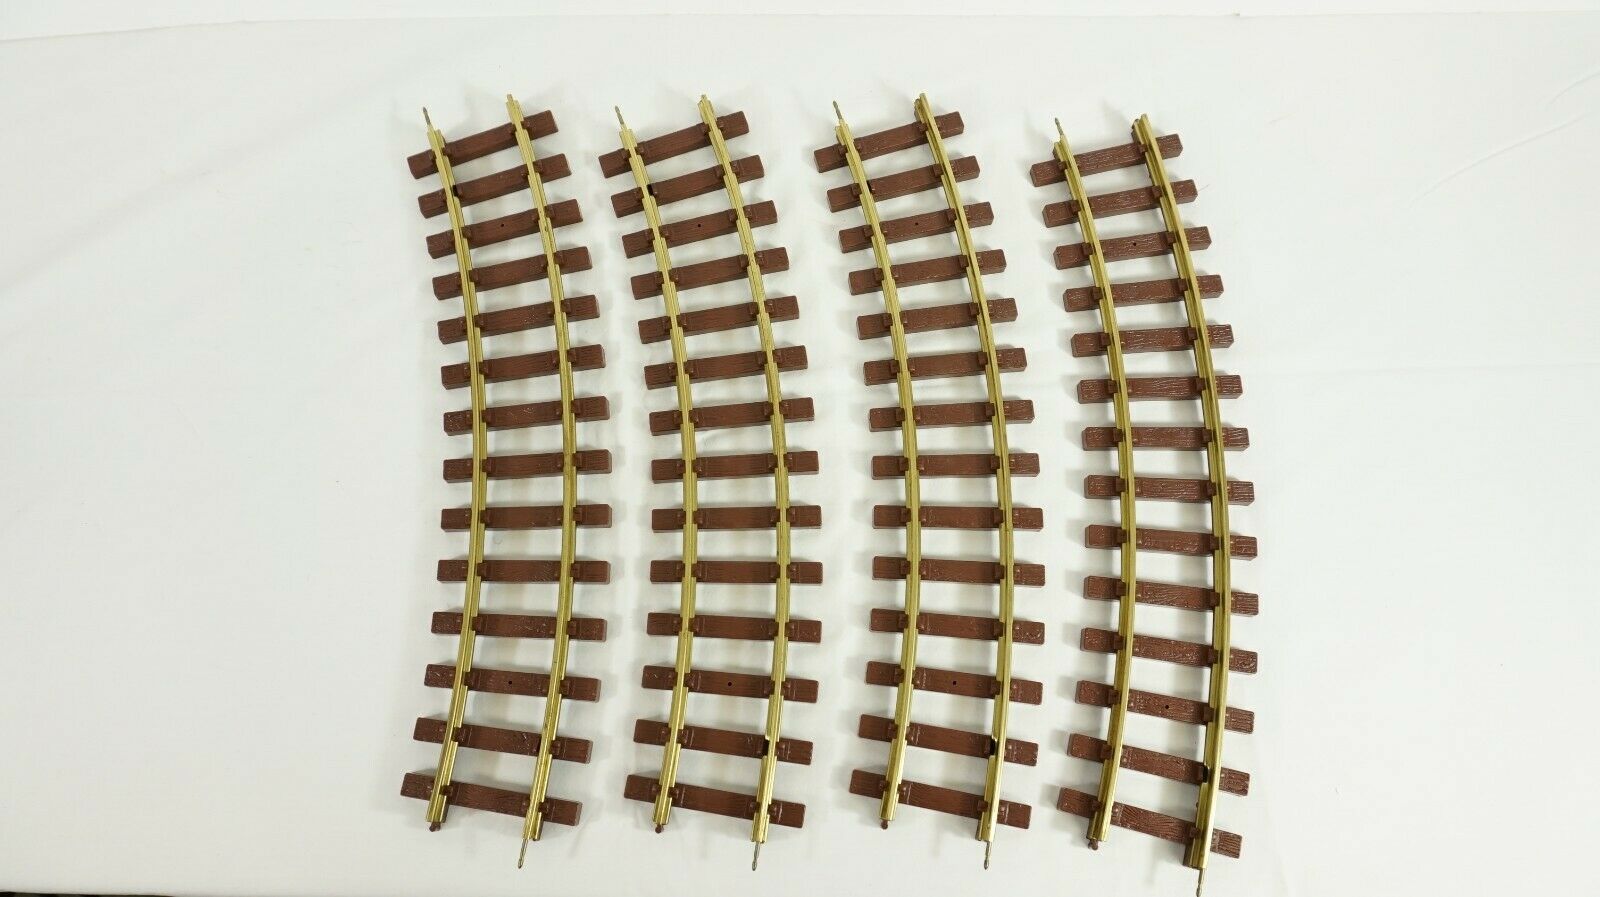 Lionel G Gauge Wide Radius Curved Track Lot Of 12 Pieces Item 8-82004 New Lot 4